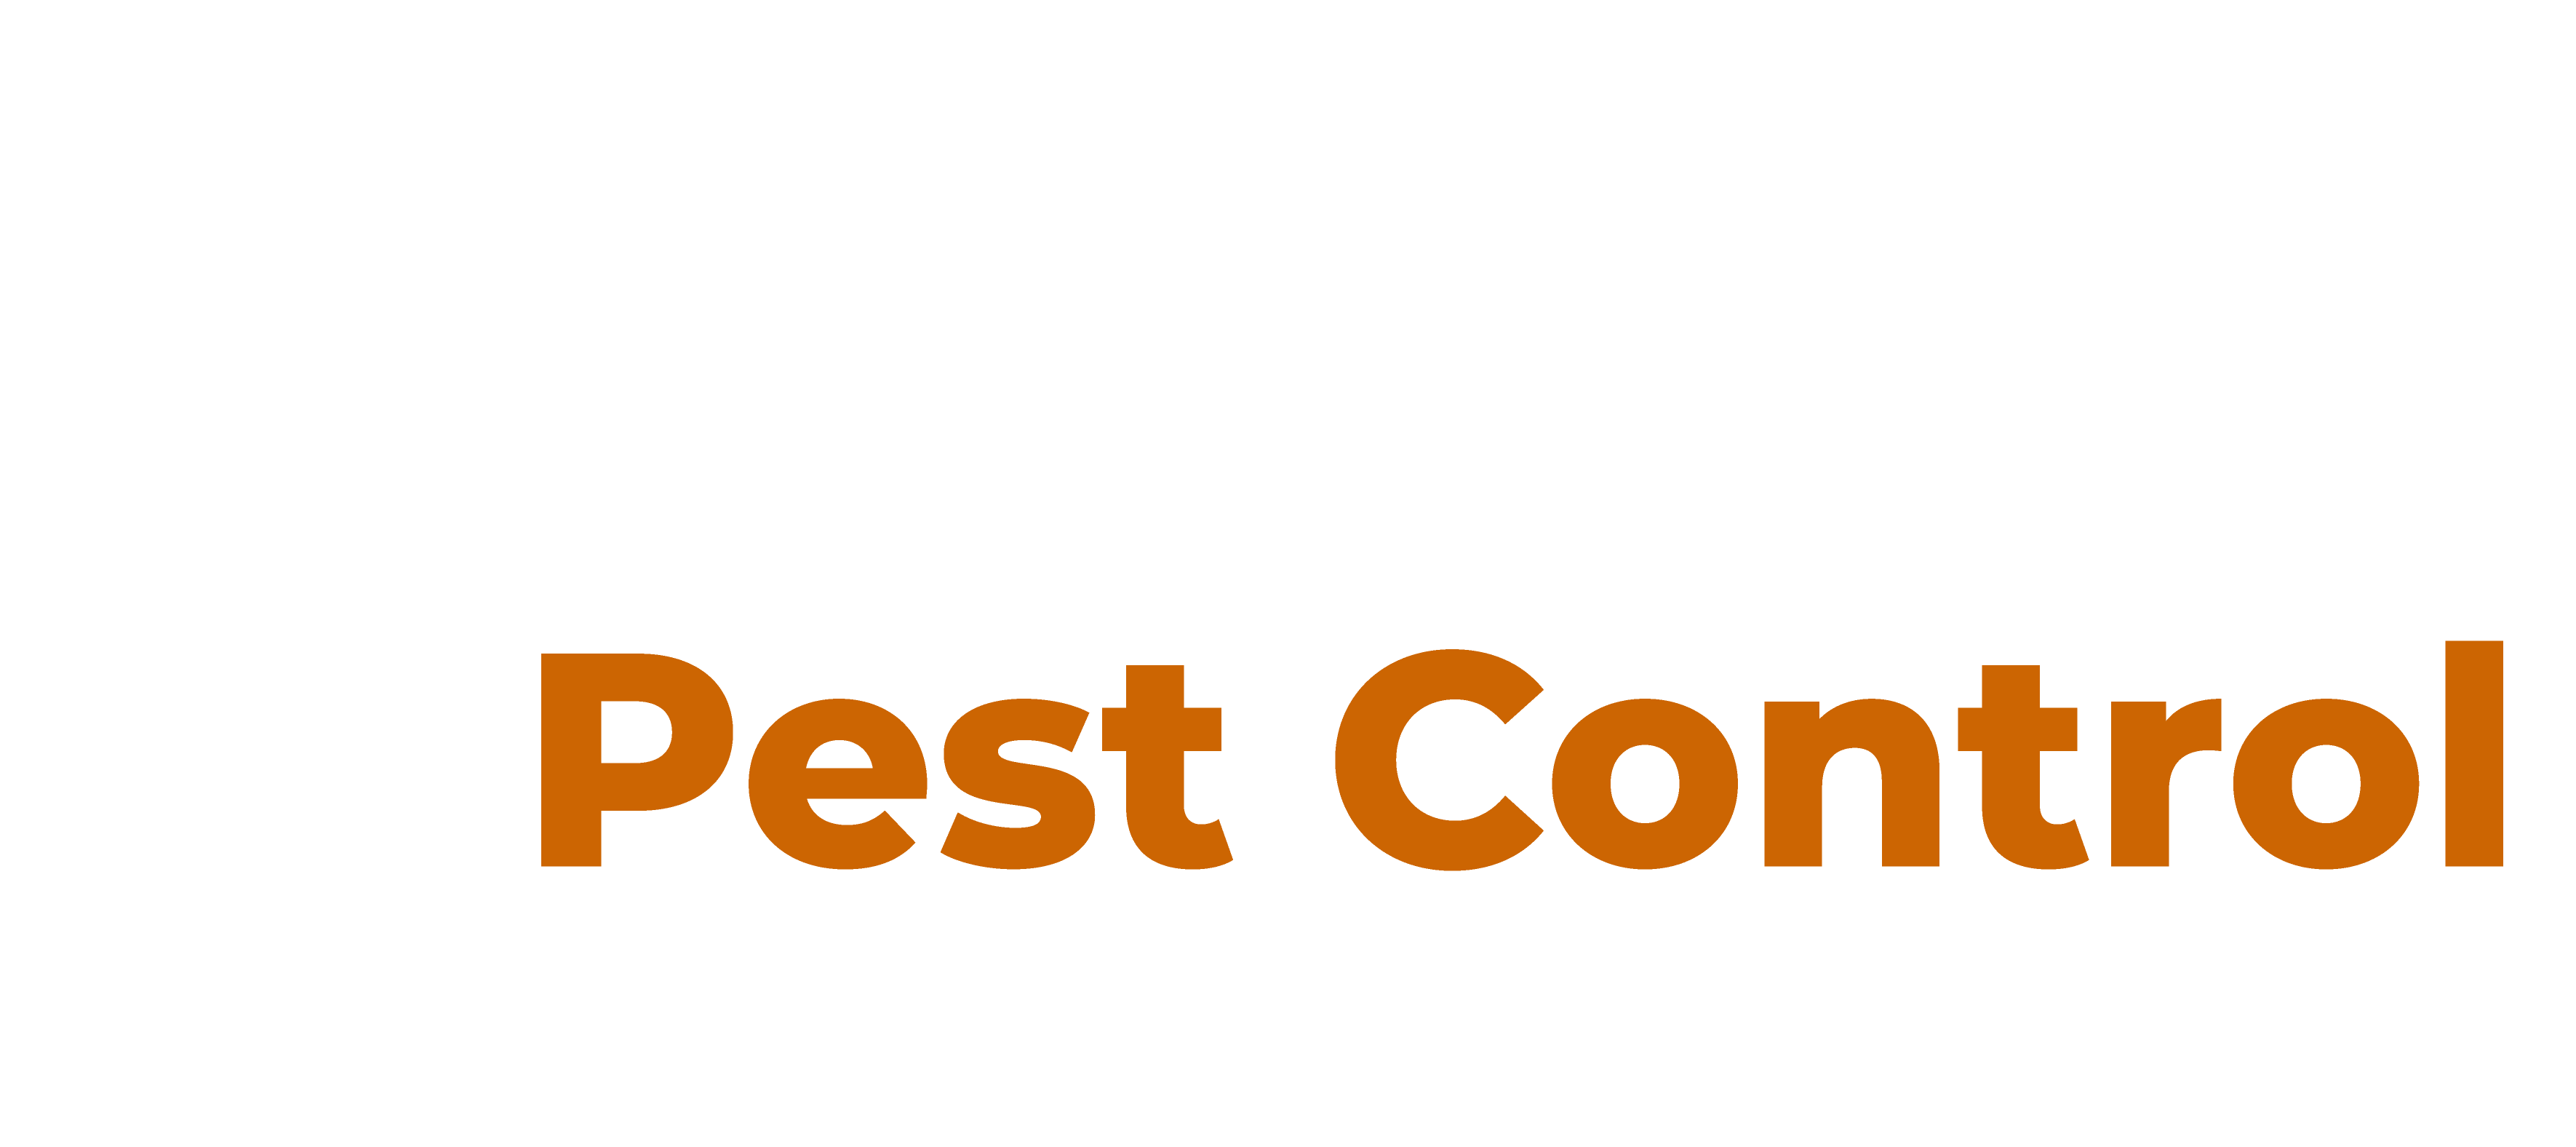 Bee Removal Services | Wasp Exterminator - Beacon Pest Control